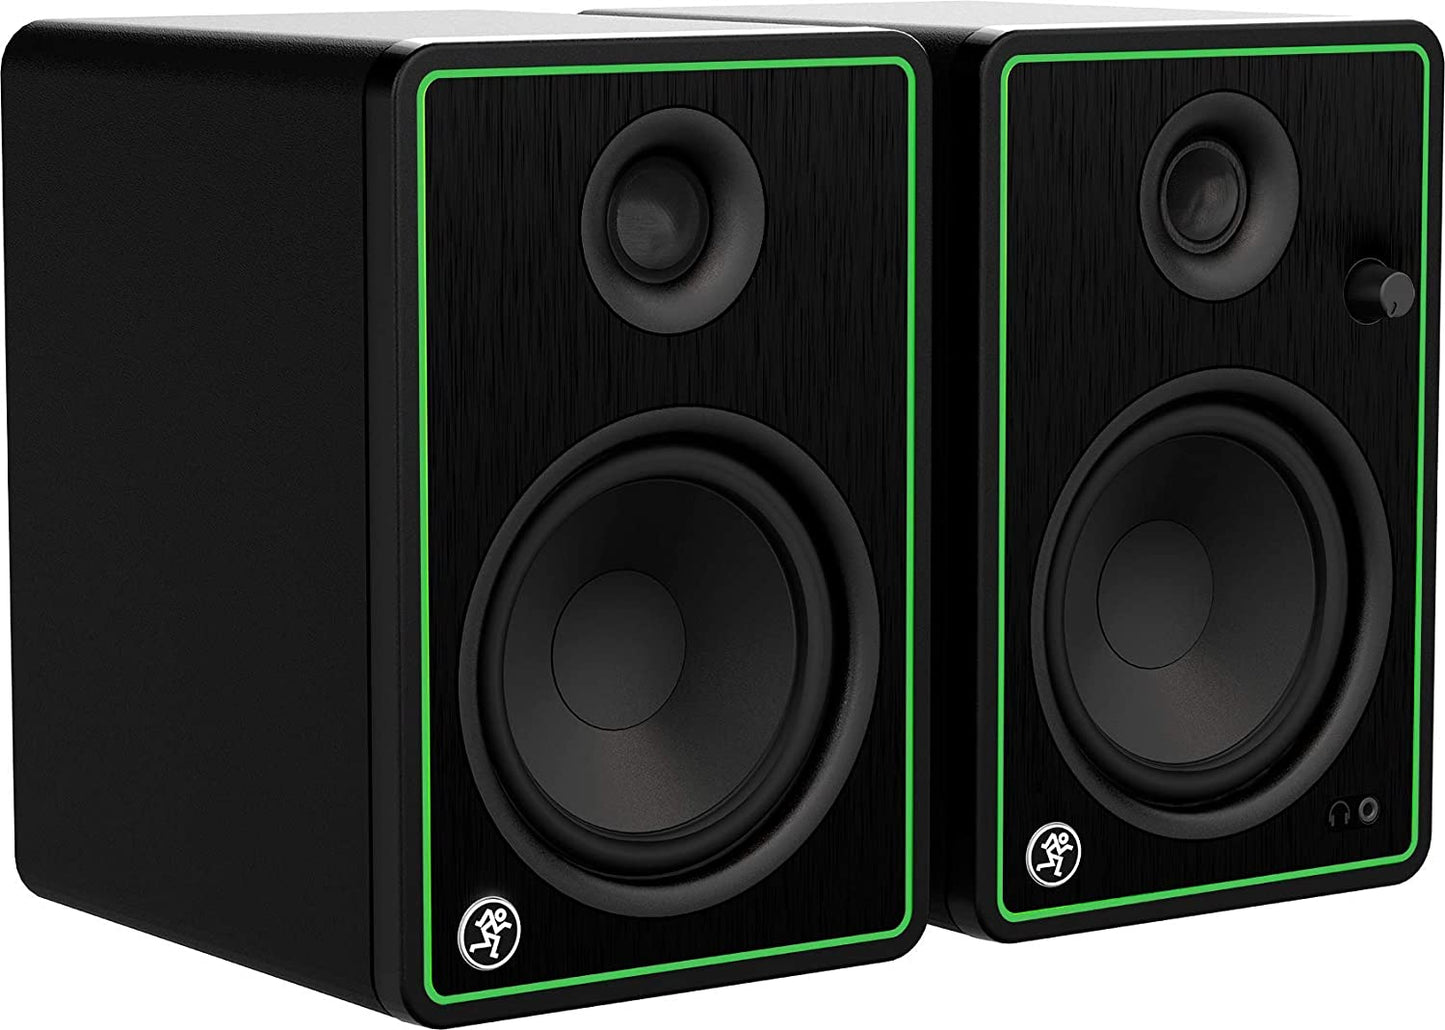 Mackie CR5-XBT 5" Multimedia Monitors with Bluetooth® (Pair)